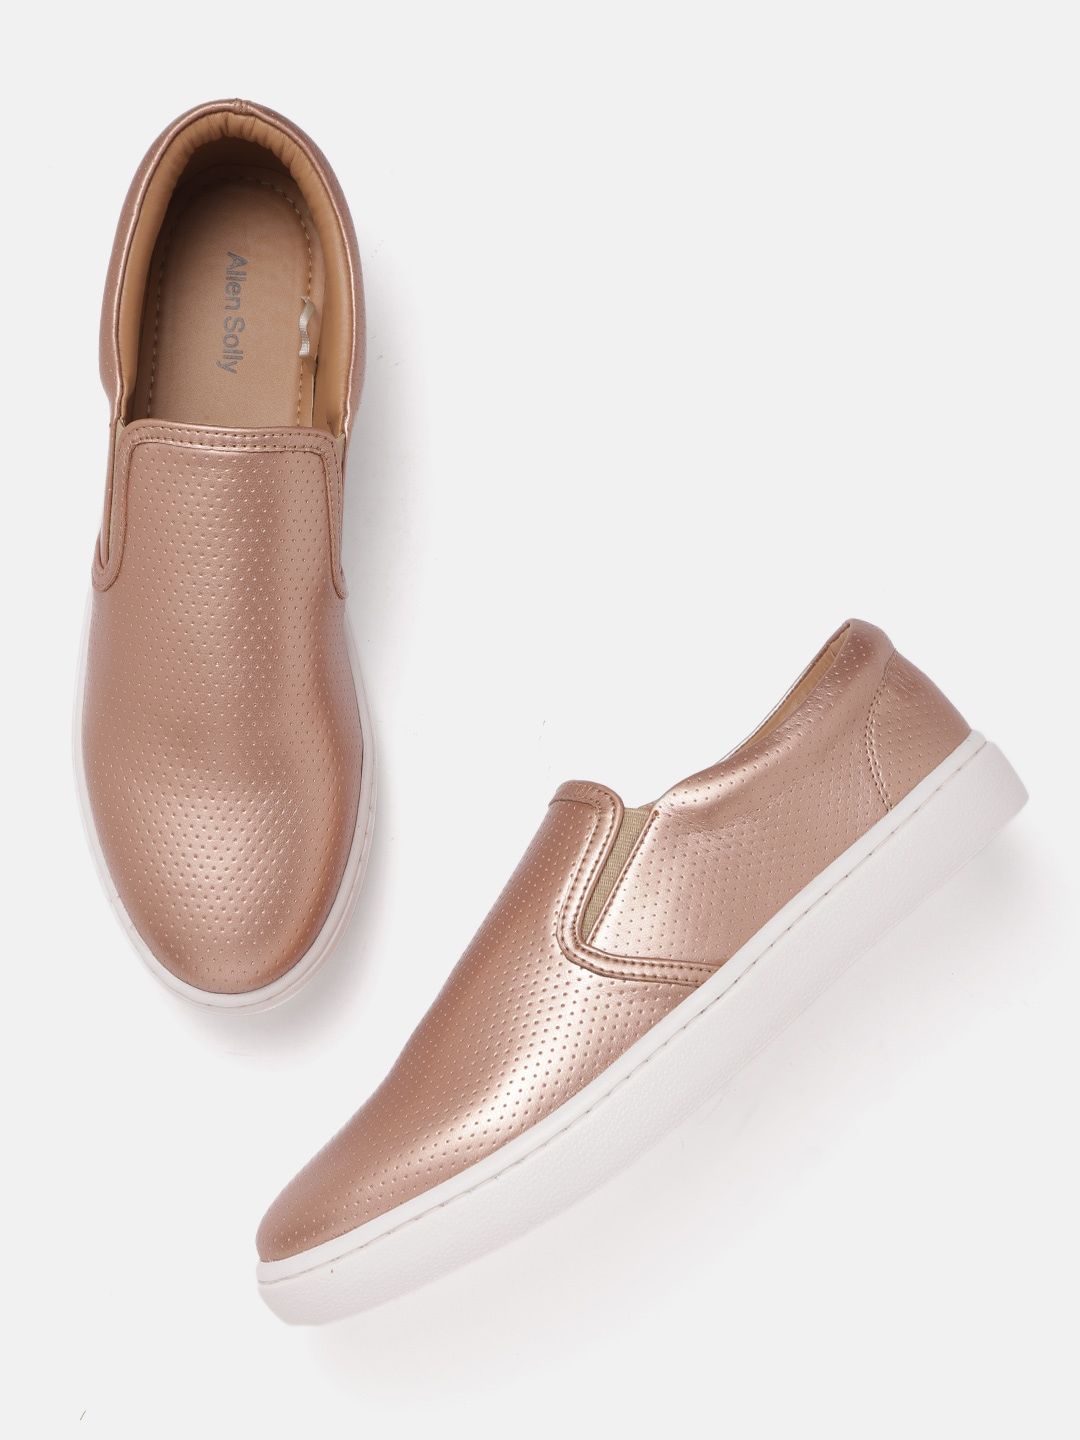 Allen Solly Women Rose Gold-Toned Perforated Slip-on Sneakers Price in India